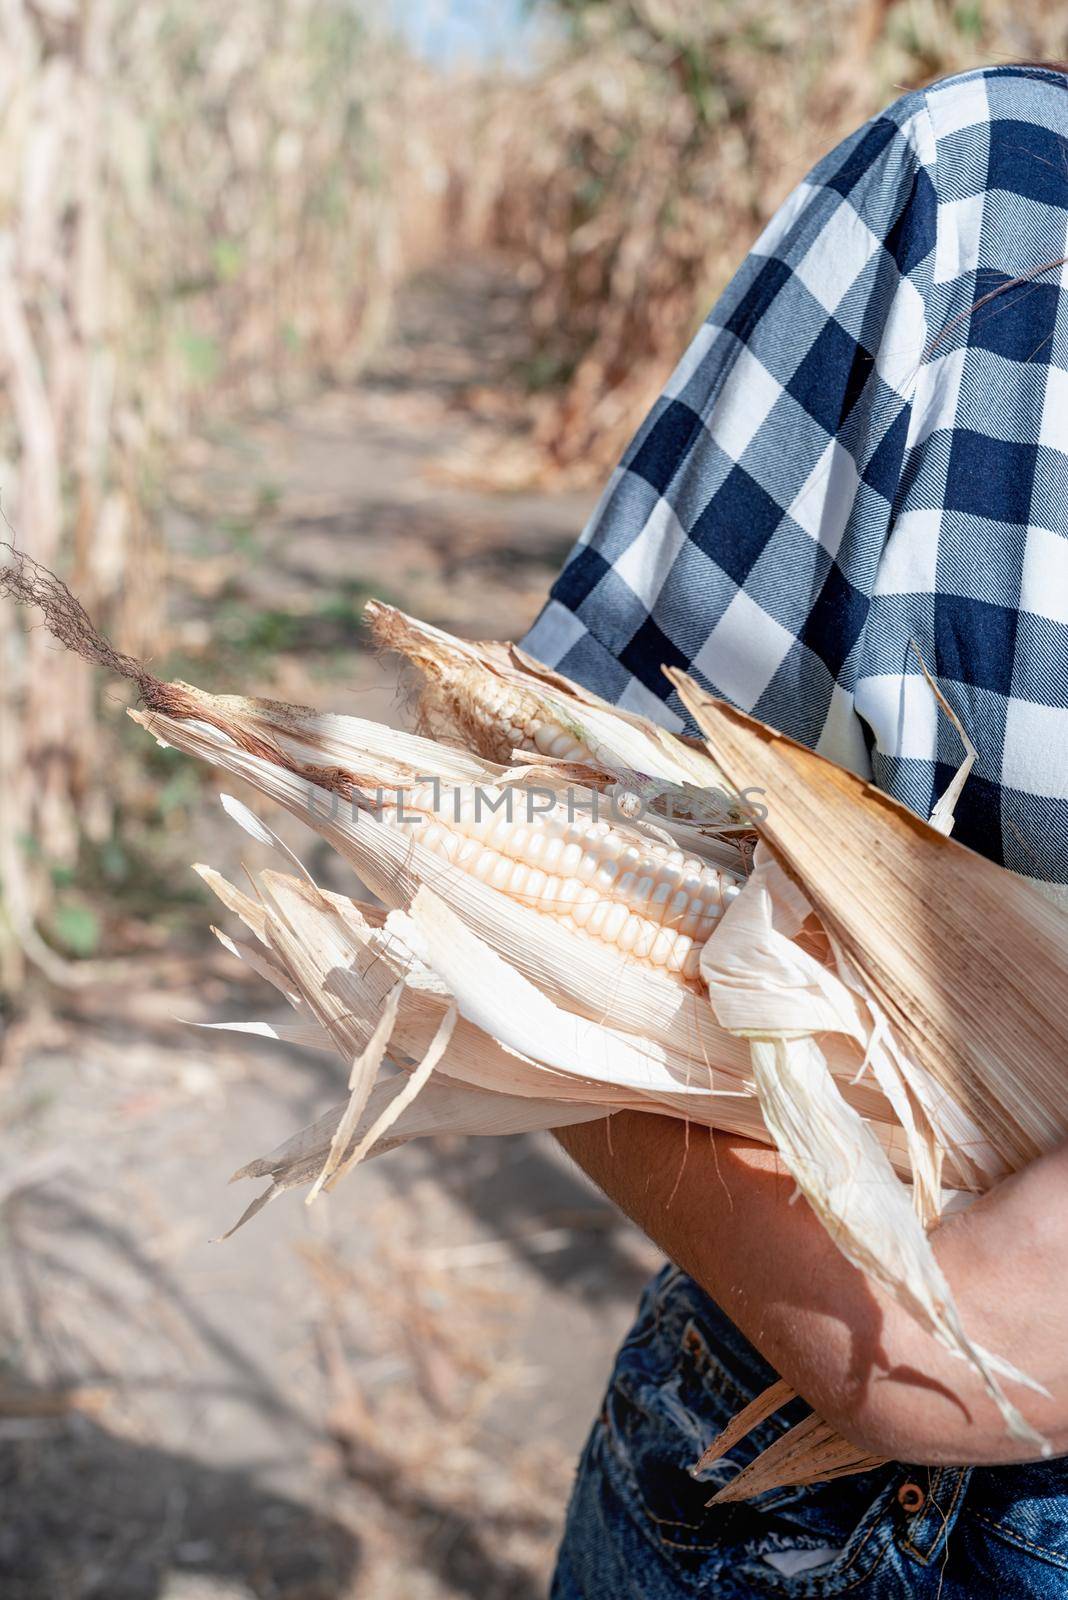 agriculture and cultivation concept. Countryside. female farmer hands holding corn cubs against corn field